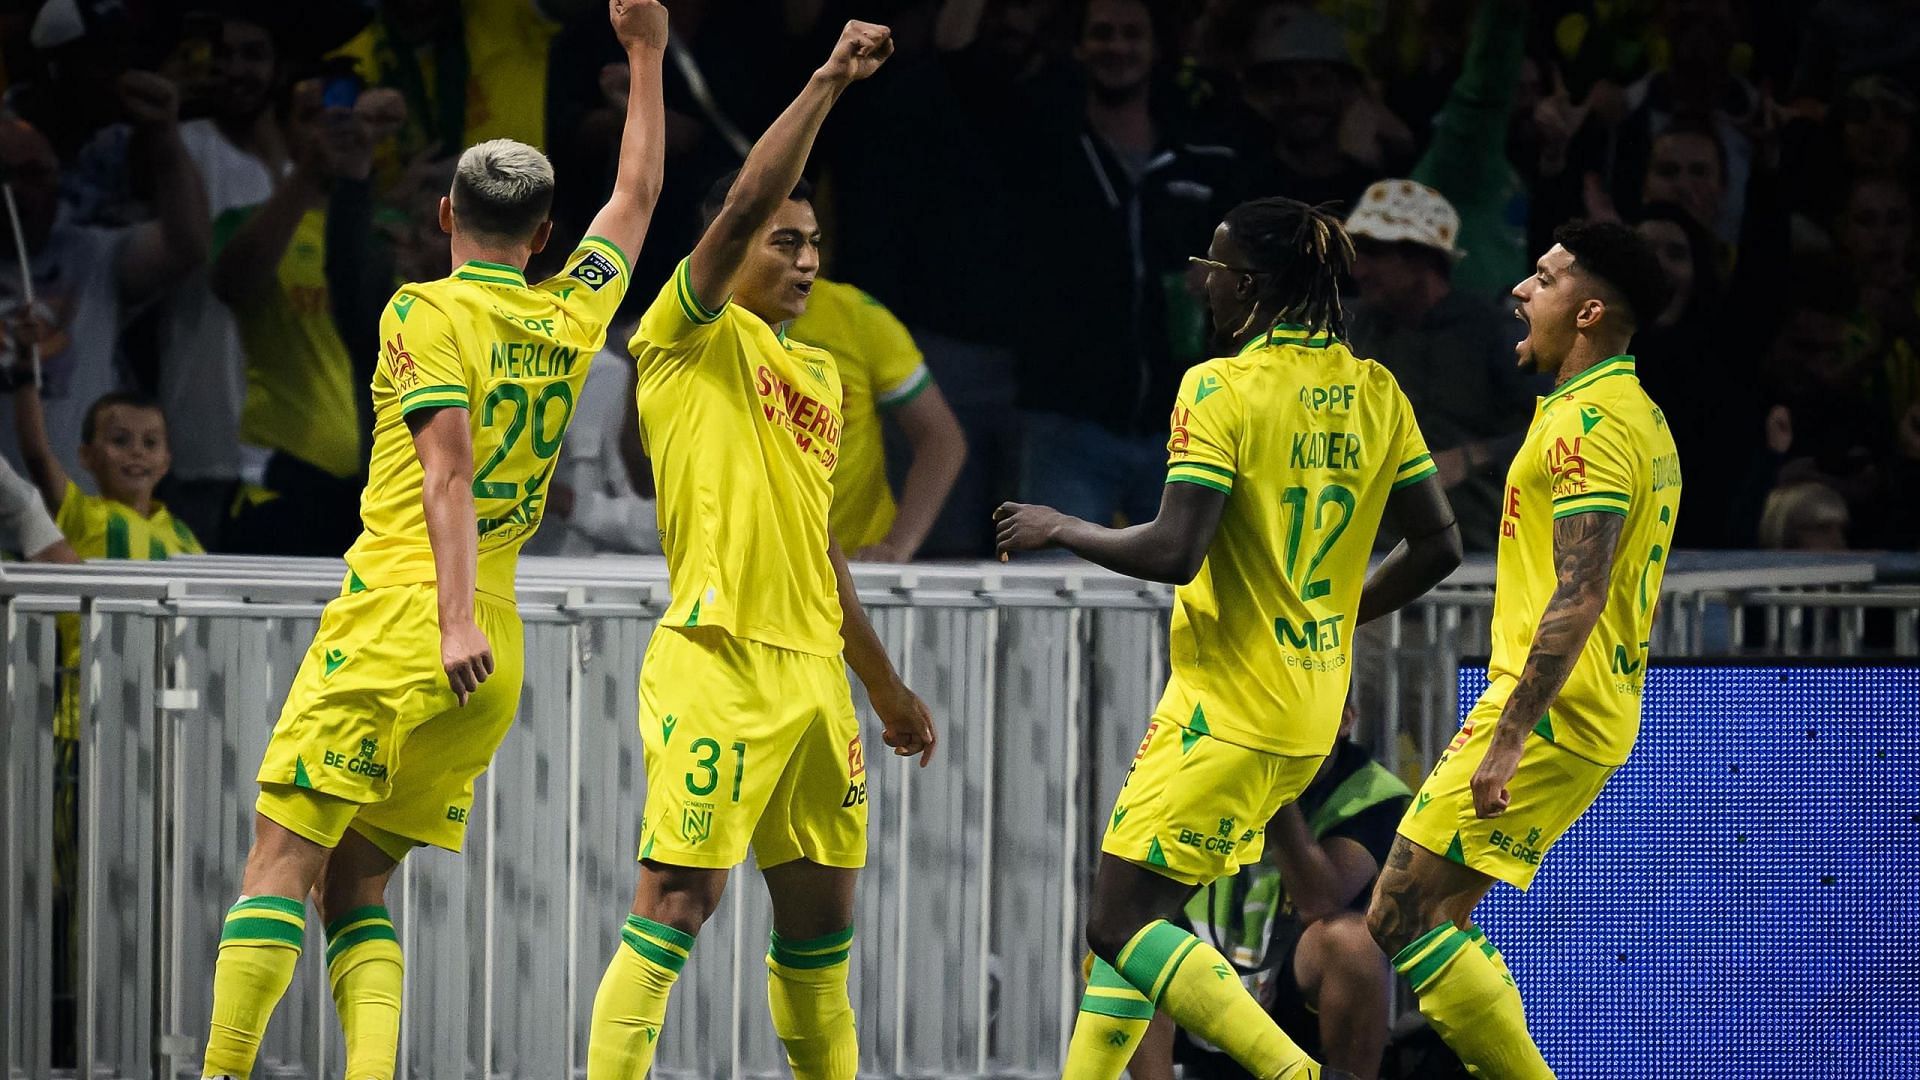 Can Nantes pick up a win over fellow strugglers Clermont this weekend?